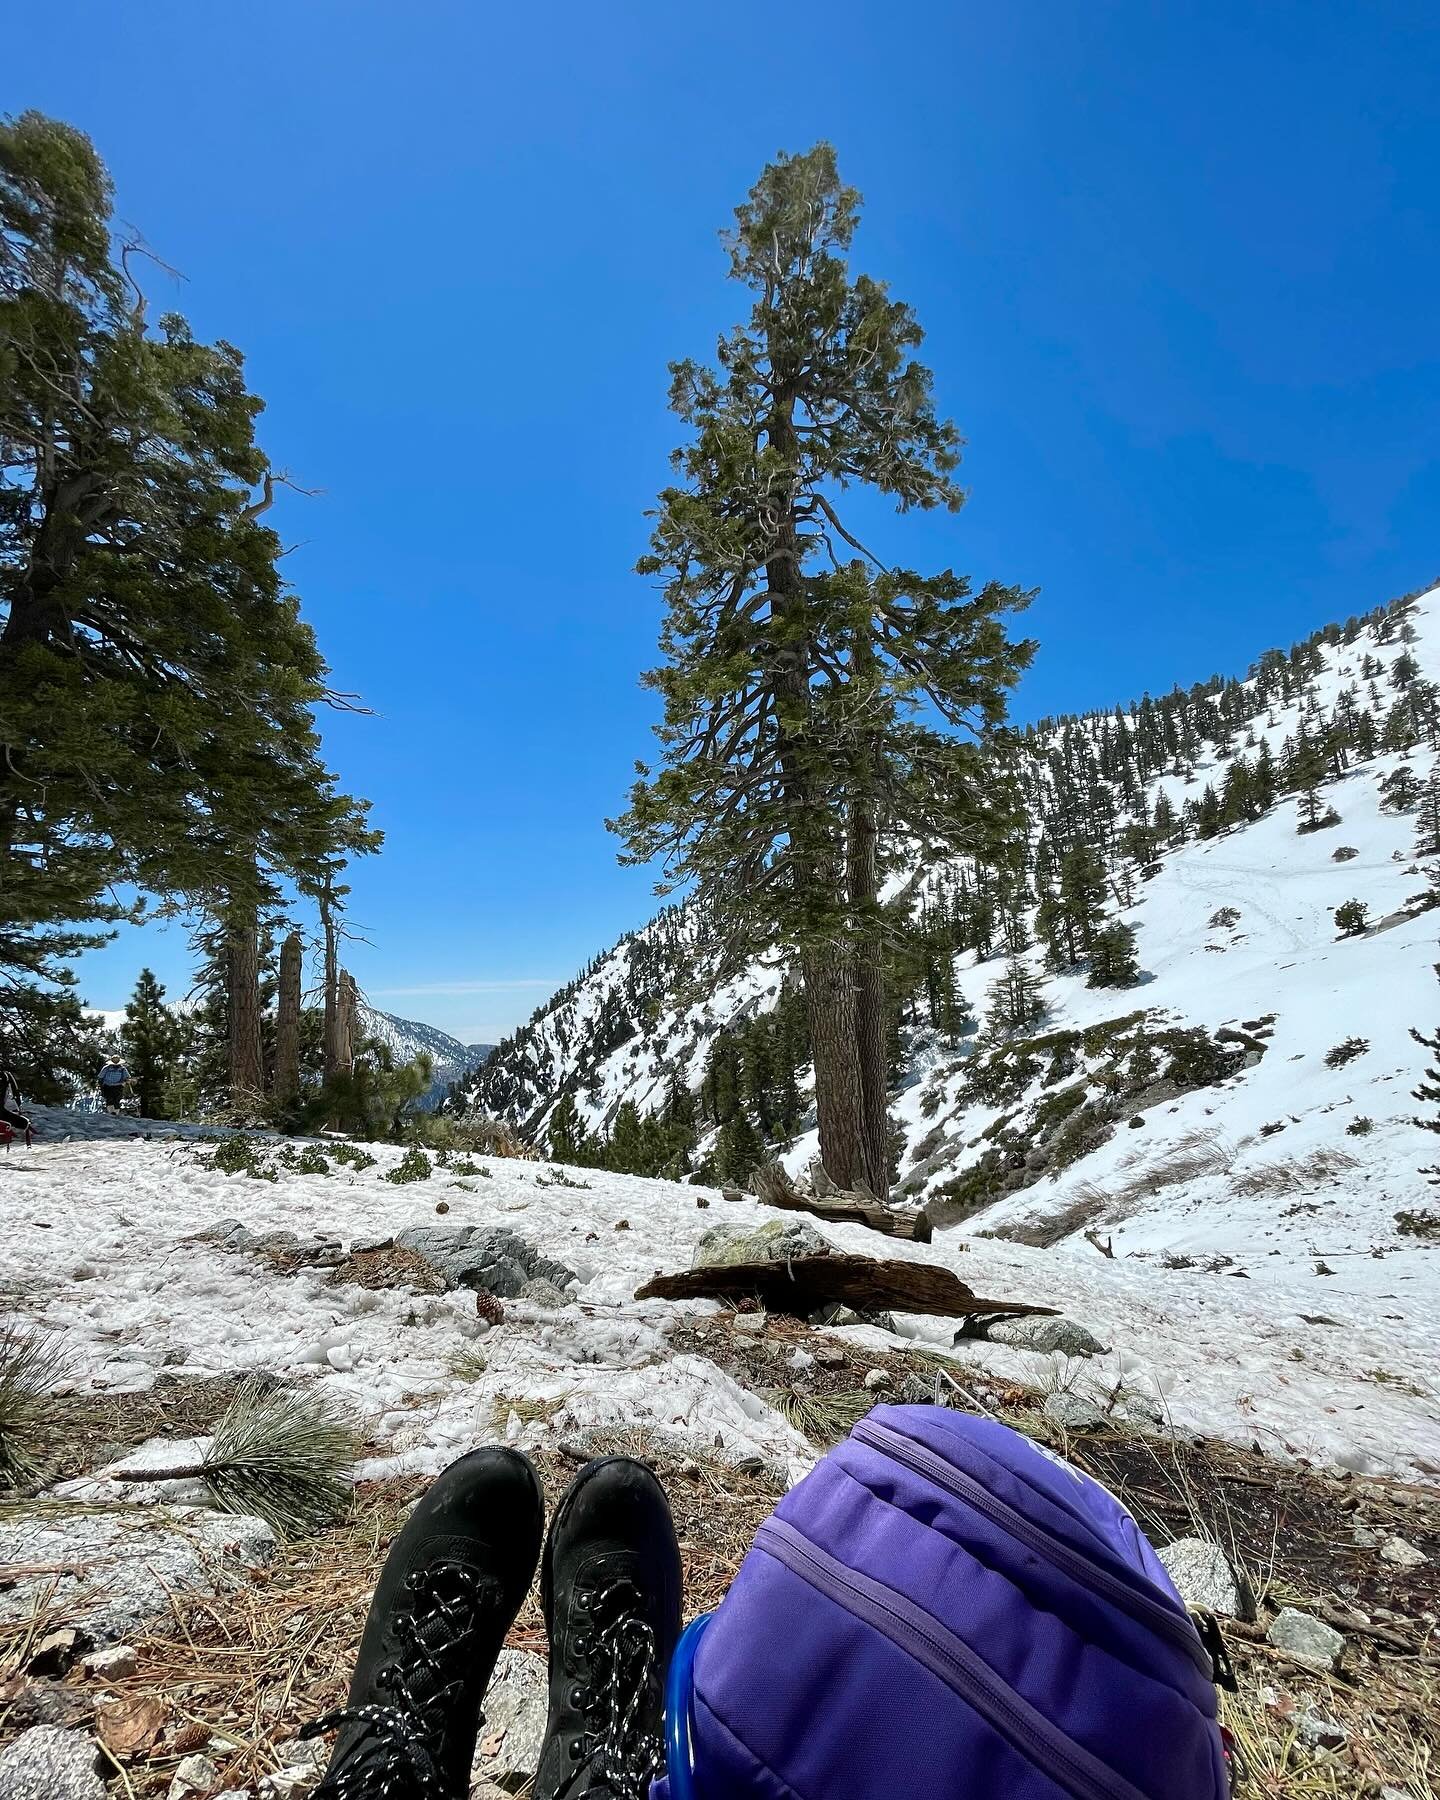 still posting pictures from last month&rsquo;s #angelesnationalforest trip? duh!! it was such a beautiful goofy fun gorgeous time

side note - if you like this song, go to youtube and search these words: big boi kate bush pitchfork verses